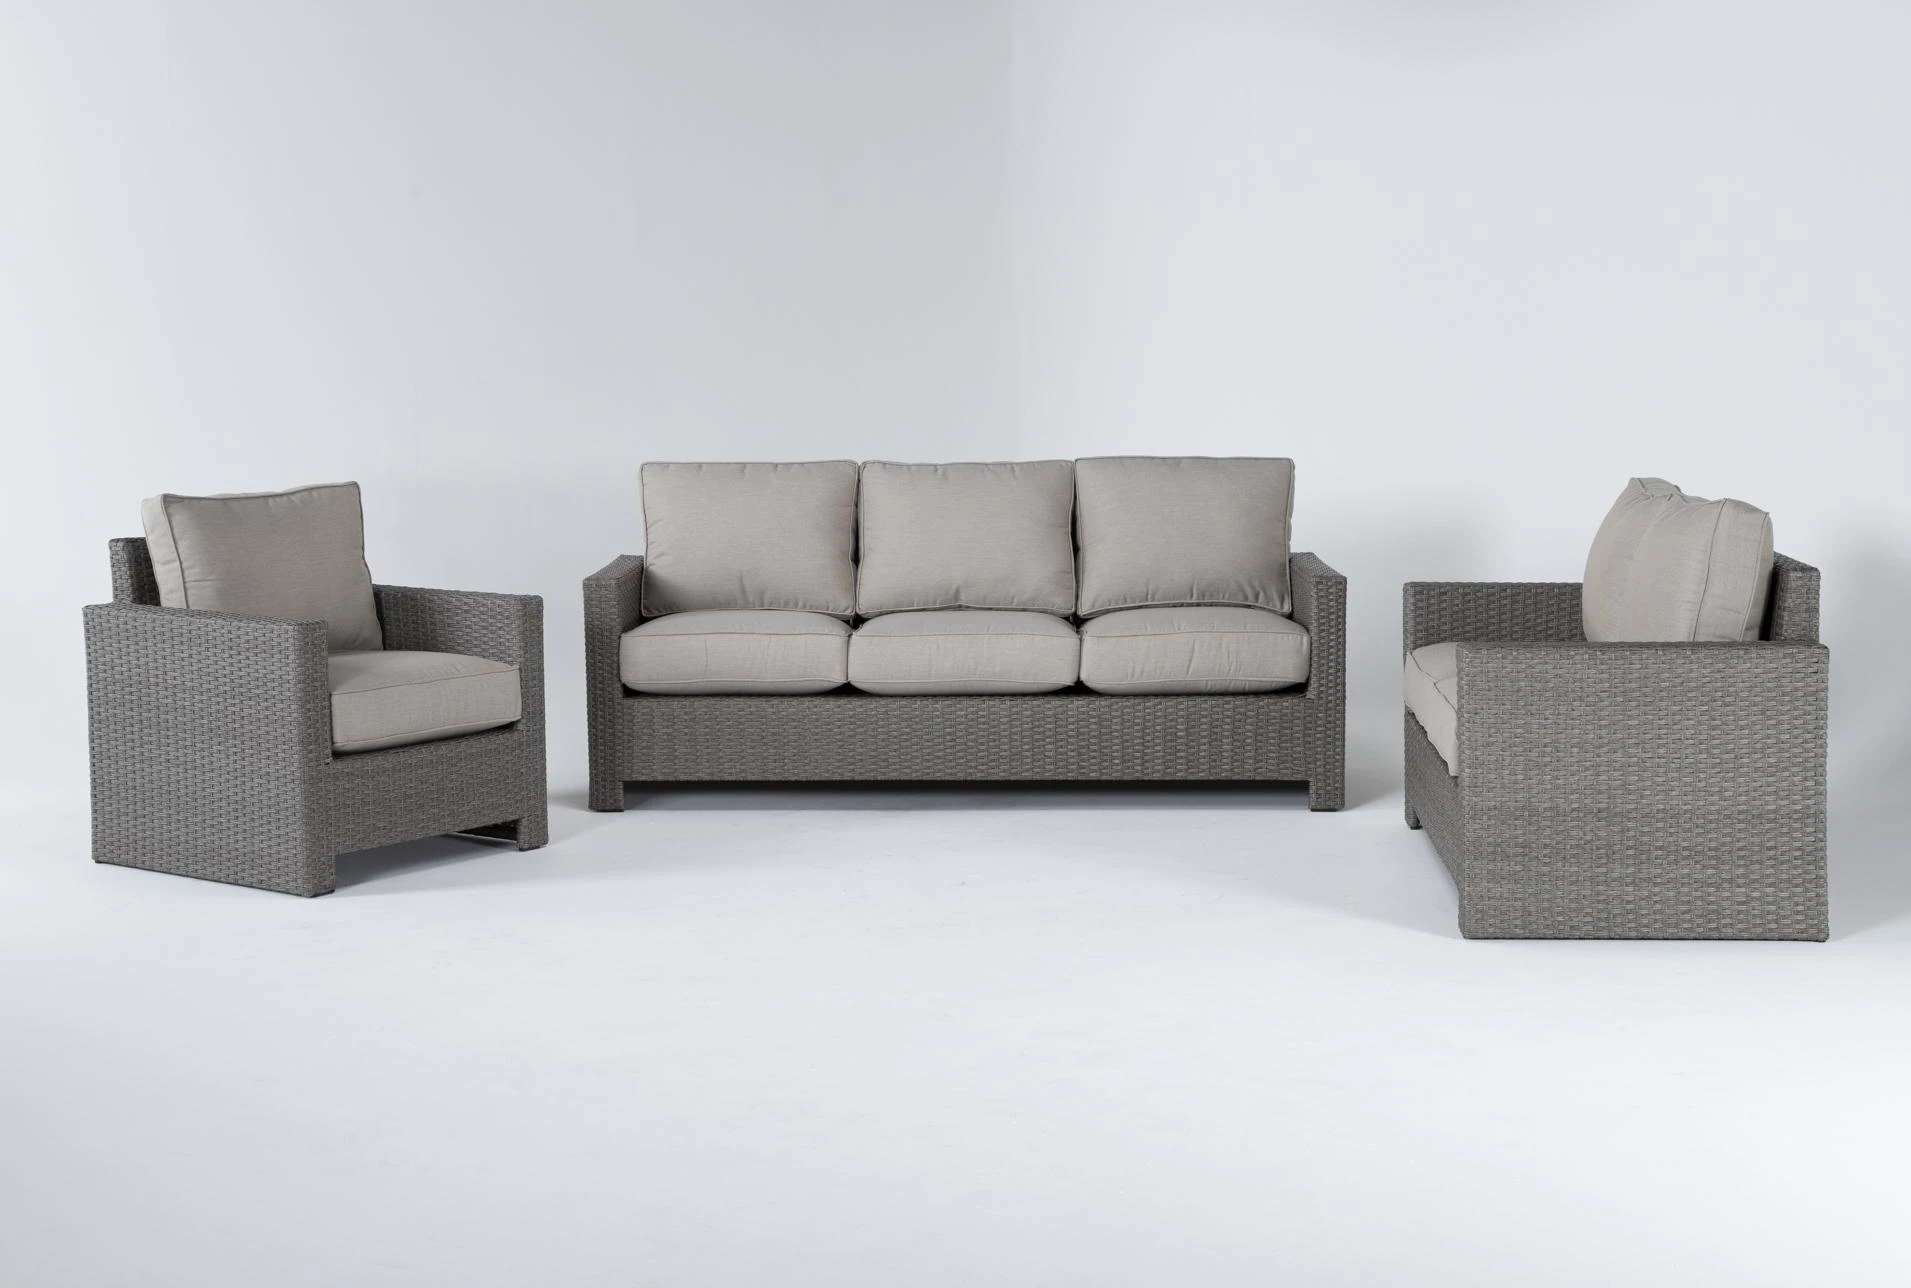 Mojave Outdoor 3 Piece Conversation Set With Lounge Chair Spaces